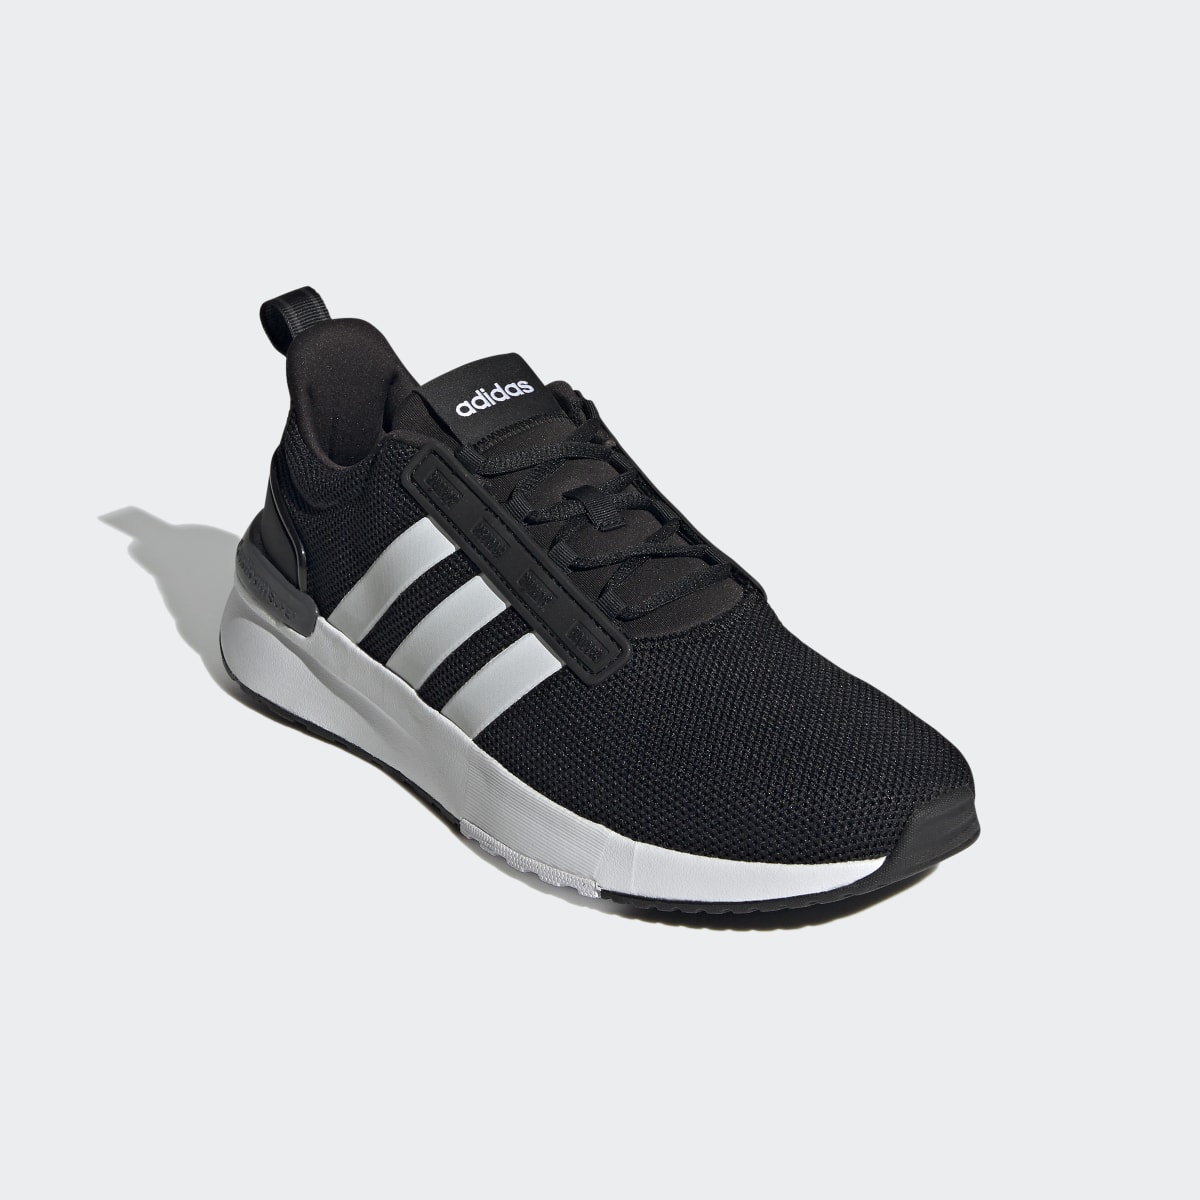 Adidas Racer TR21 Shoes. 4